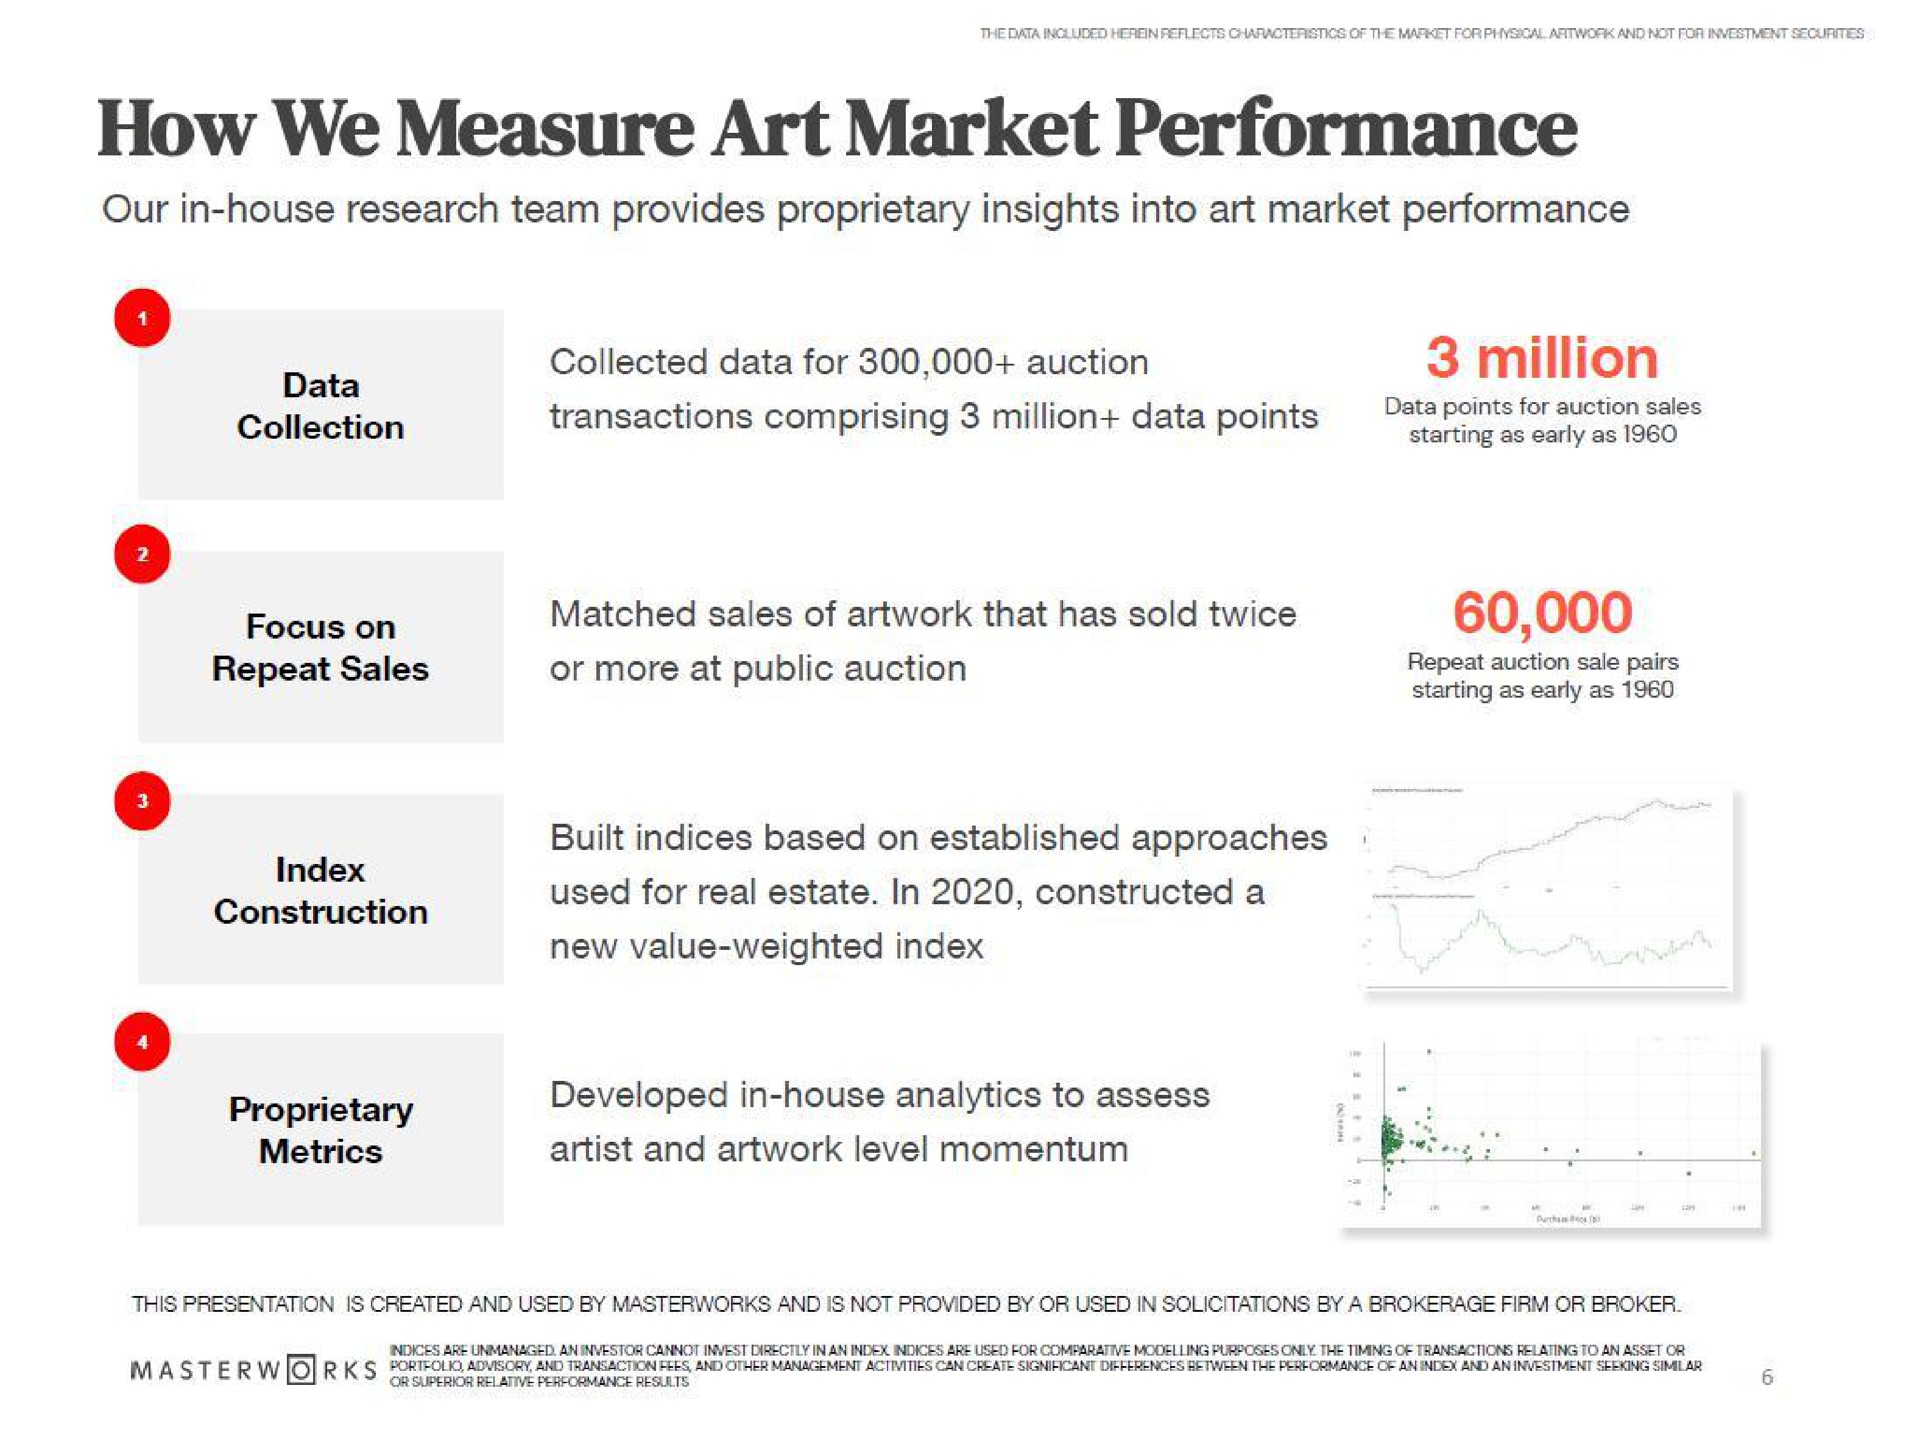 how we measure art market performance our in house research team provides proprietary insights into art market performance collection transactions comprising million data points metrics artist and level momentum | Masterworks